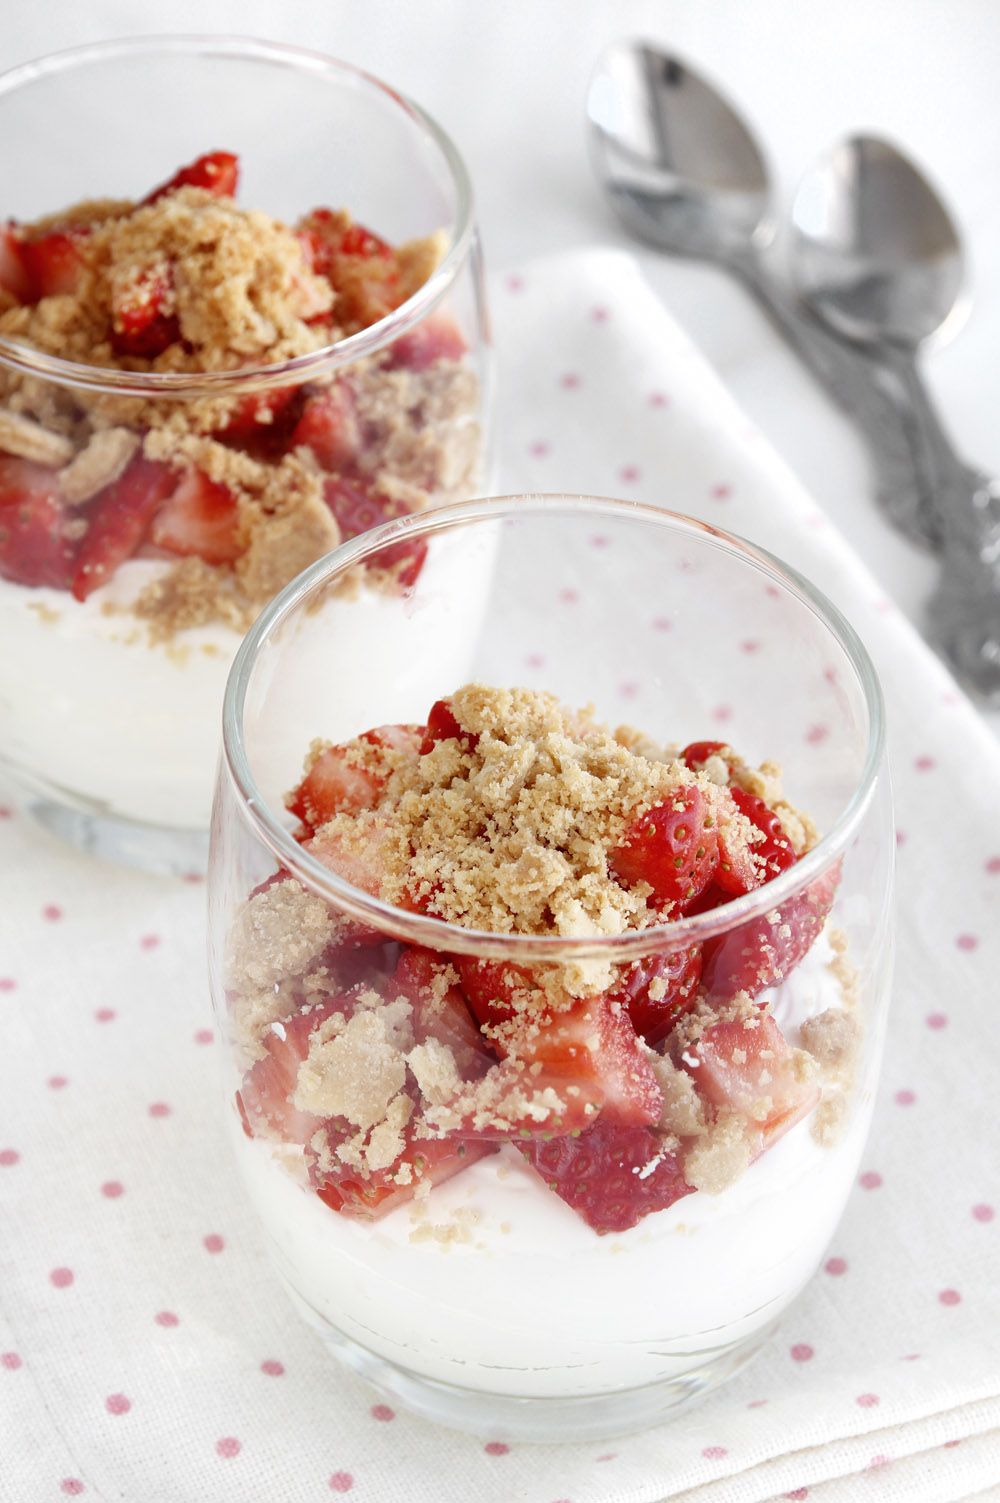 Strawberry, Cream and Streusel Cups